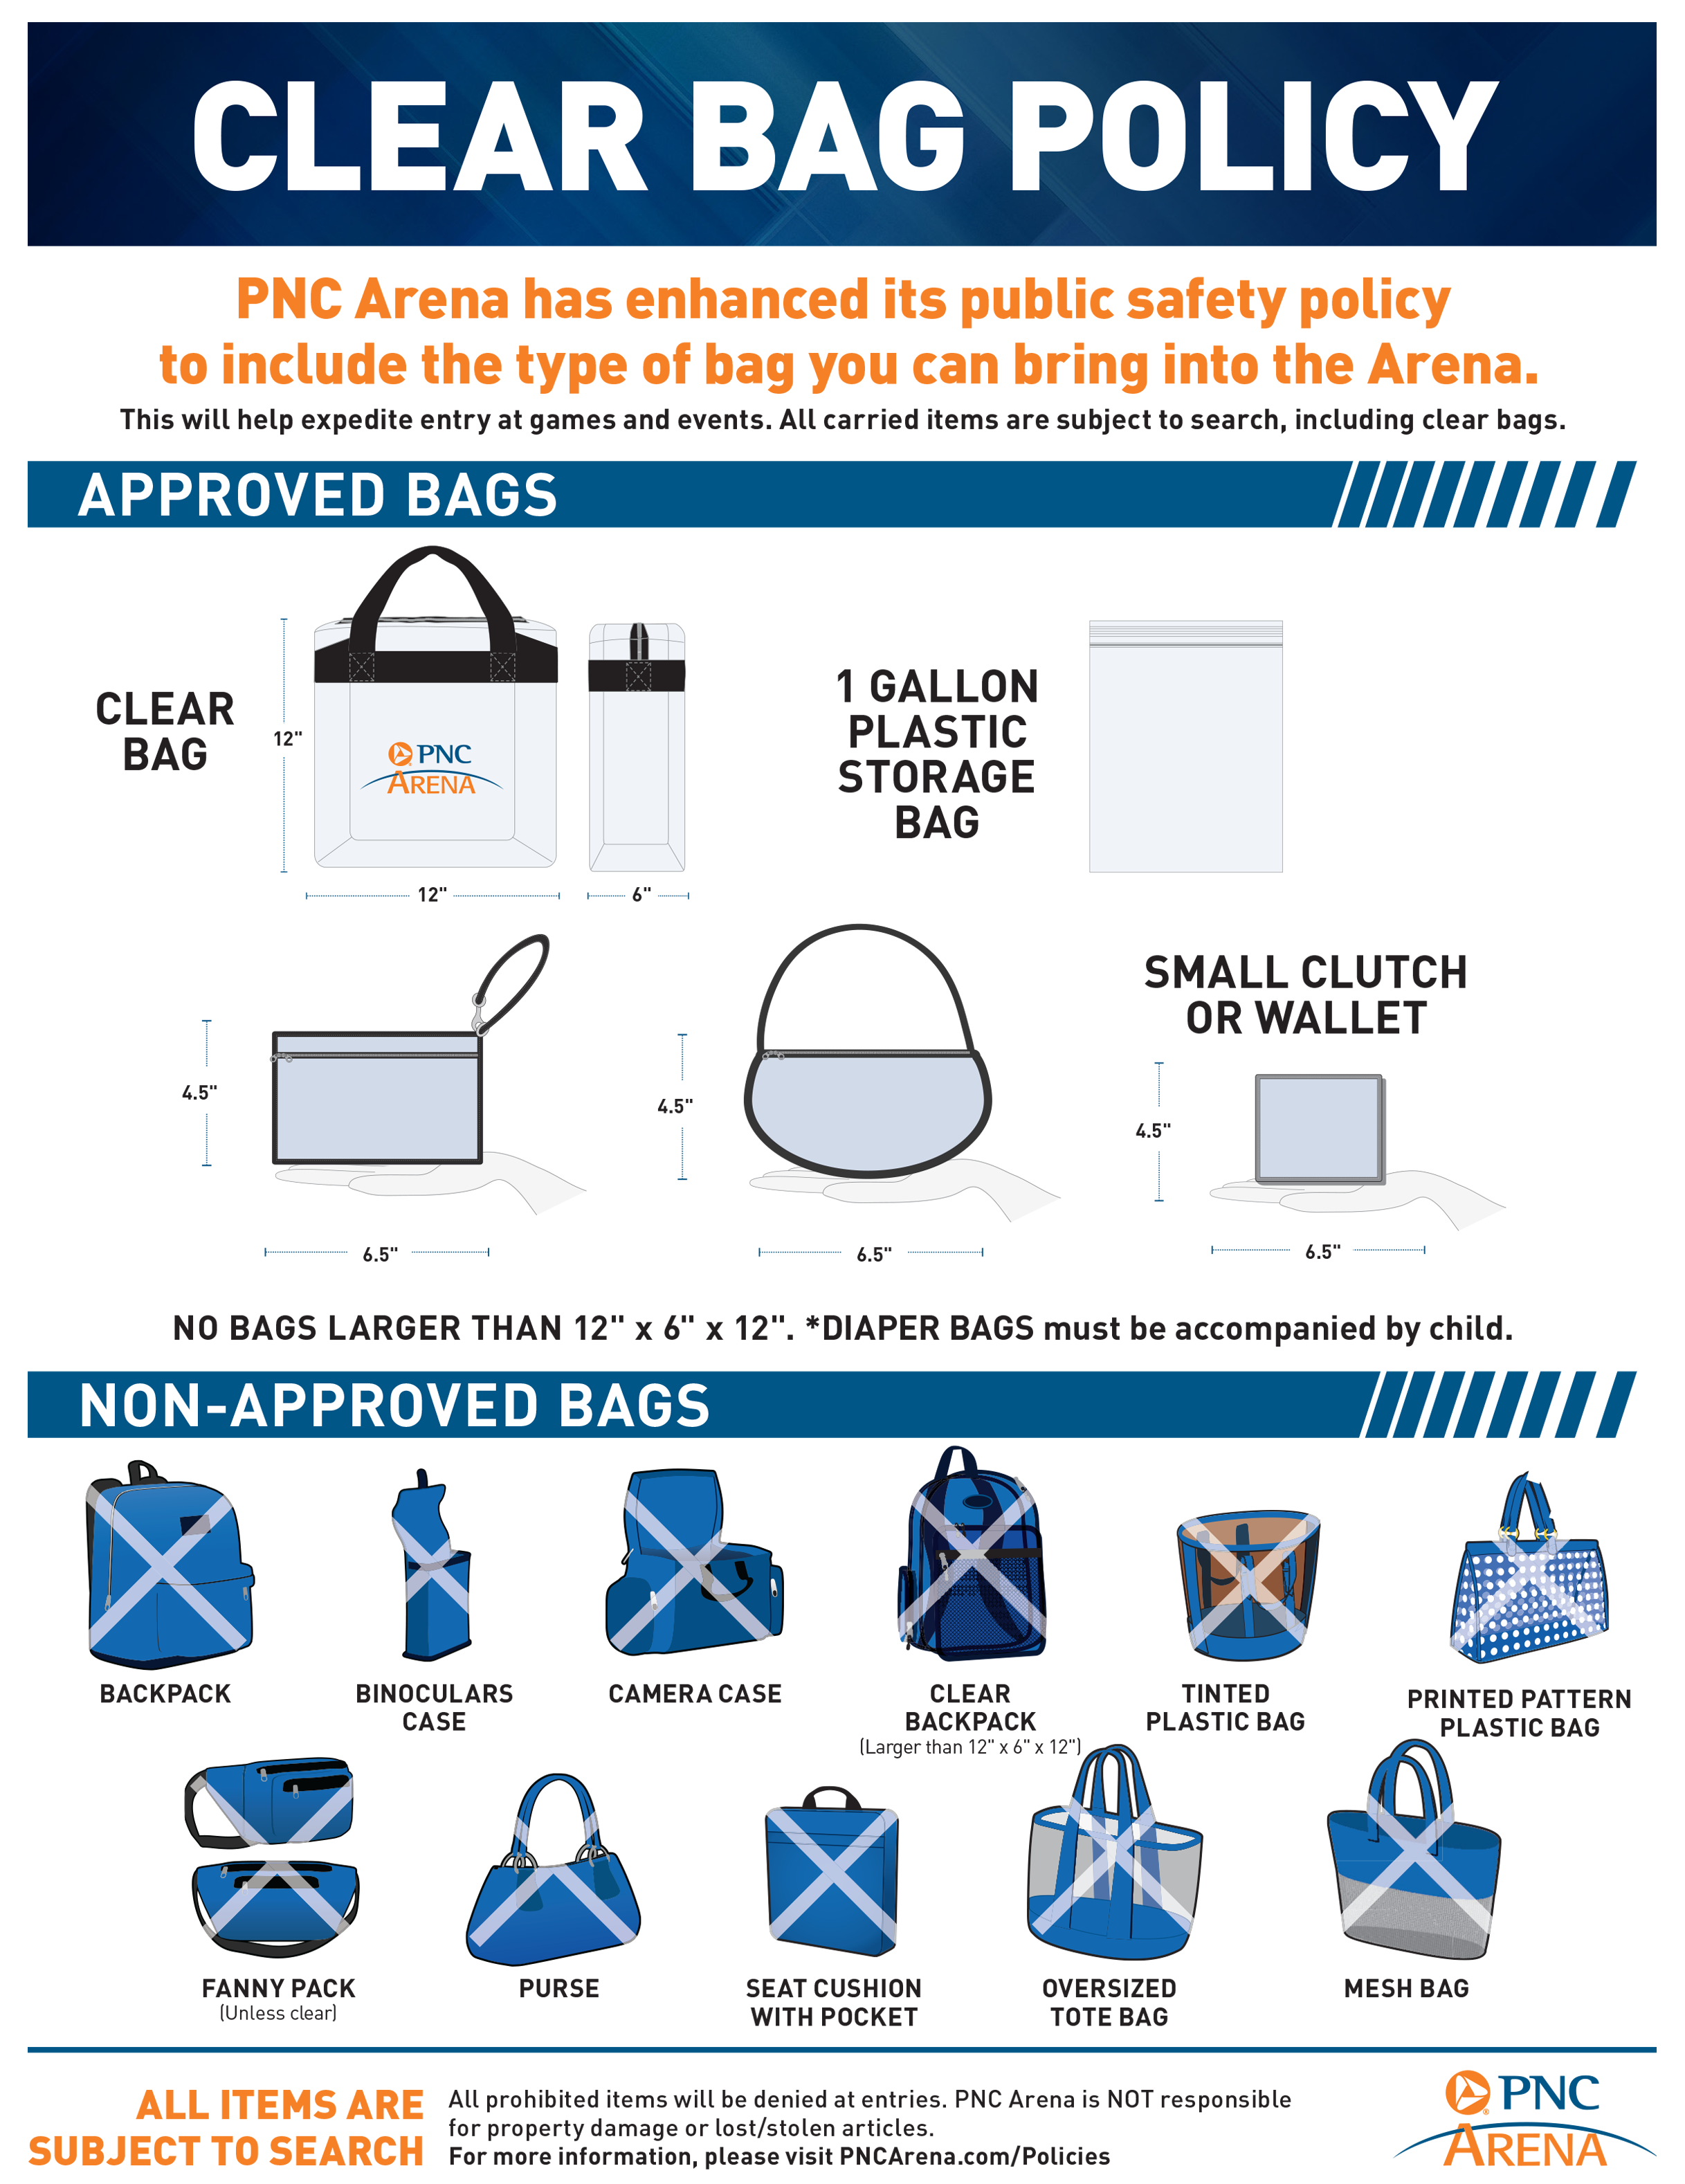 Axiata Arena Bag Policy : Bag policy and fan faqs. - jlaikust